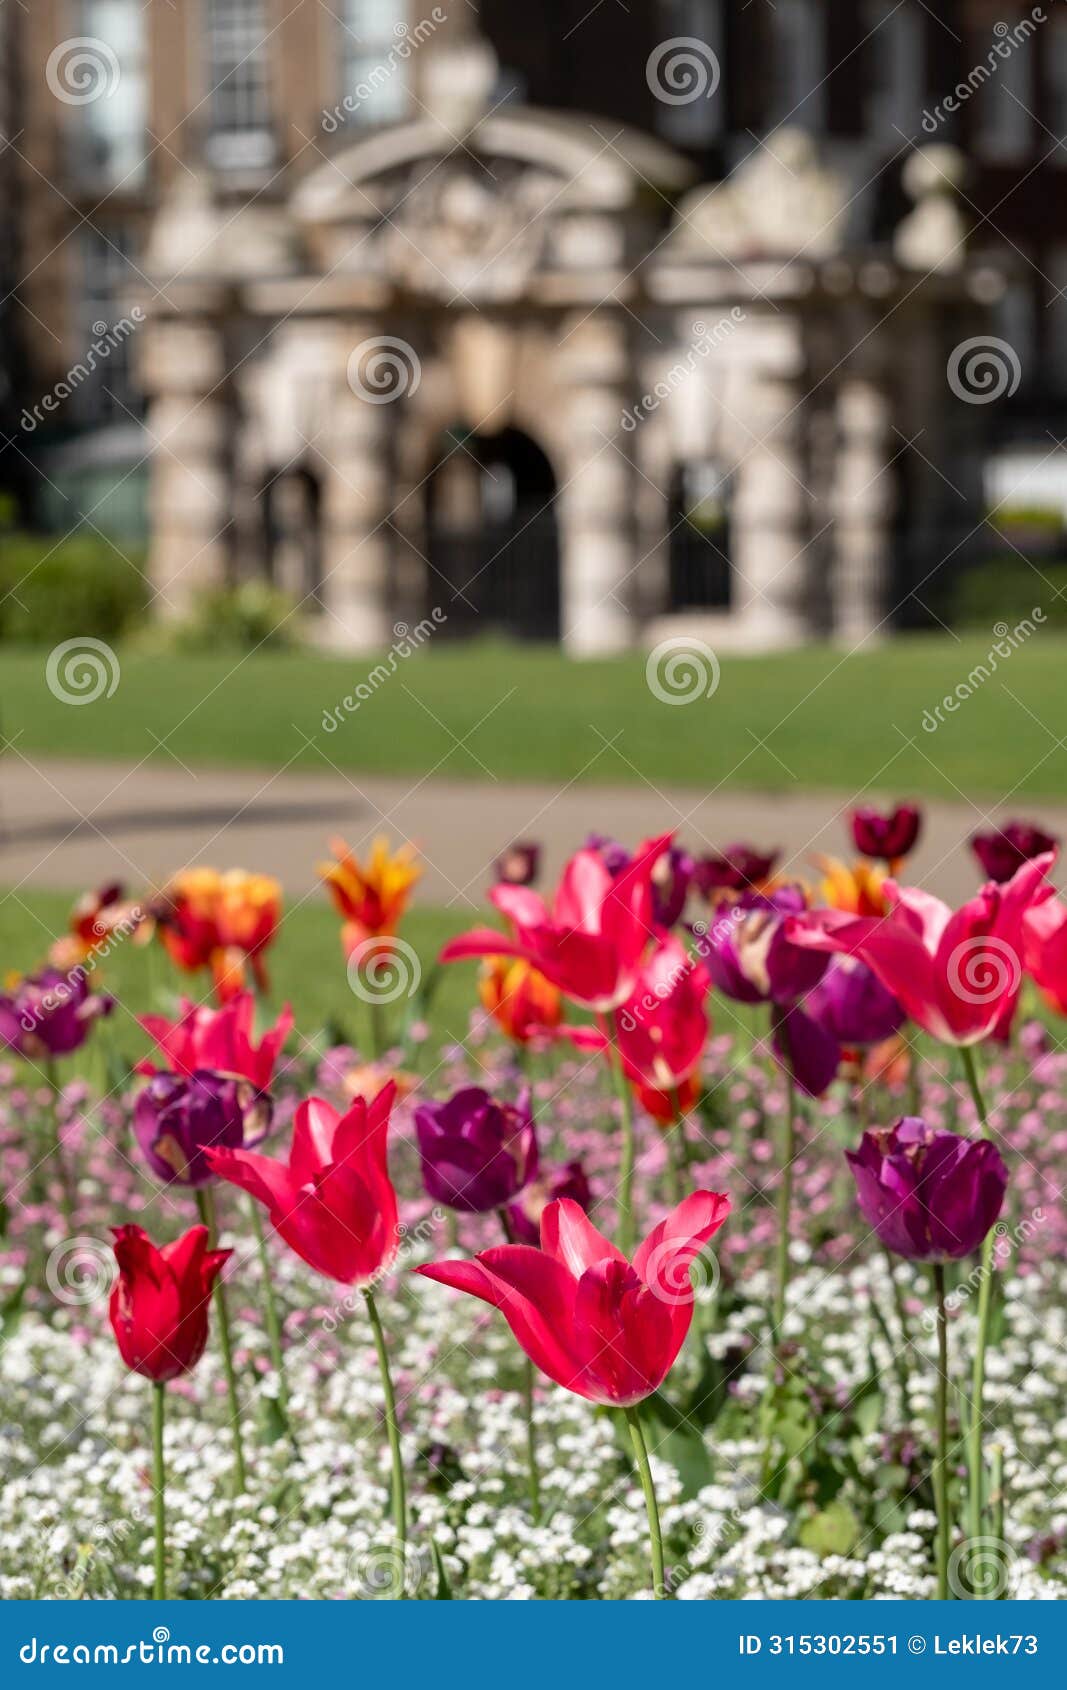 colourful tulips, photographed in springtime at victoria embankment gardens on the bank of the river thames in central london, uk.